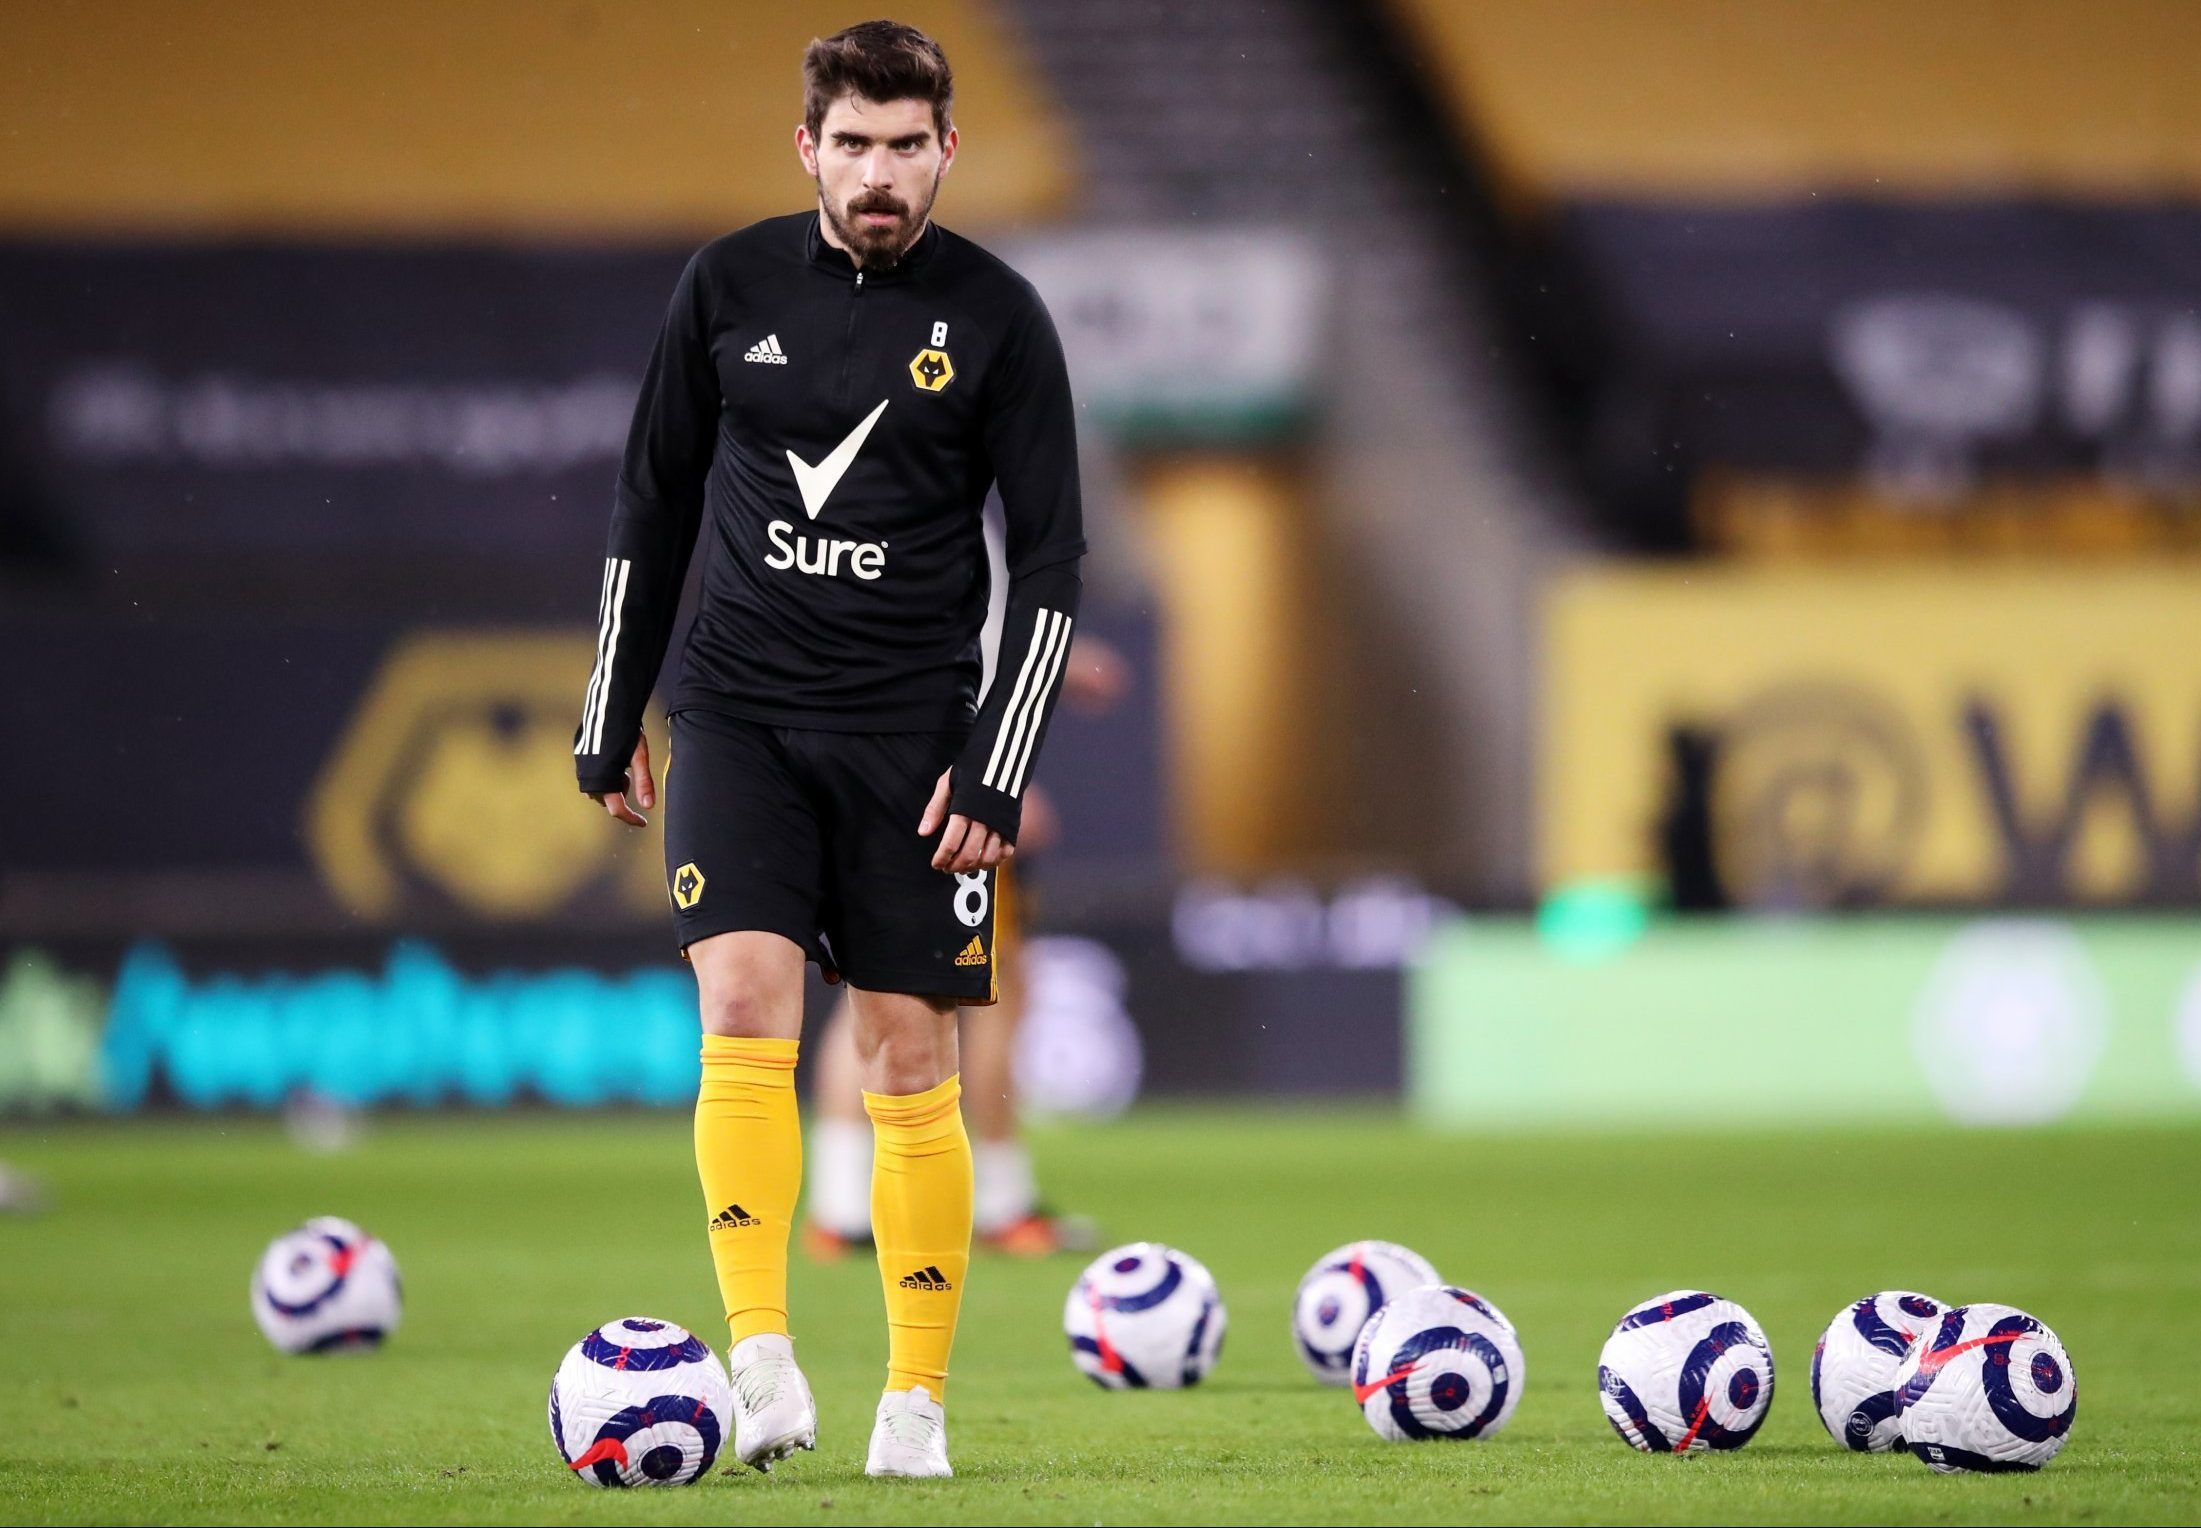 wolves midfielder ruben neves during warm-up before clash with leeds united in the premier league